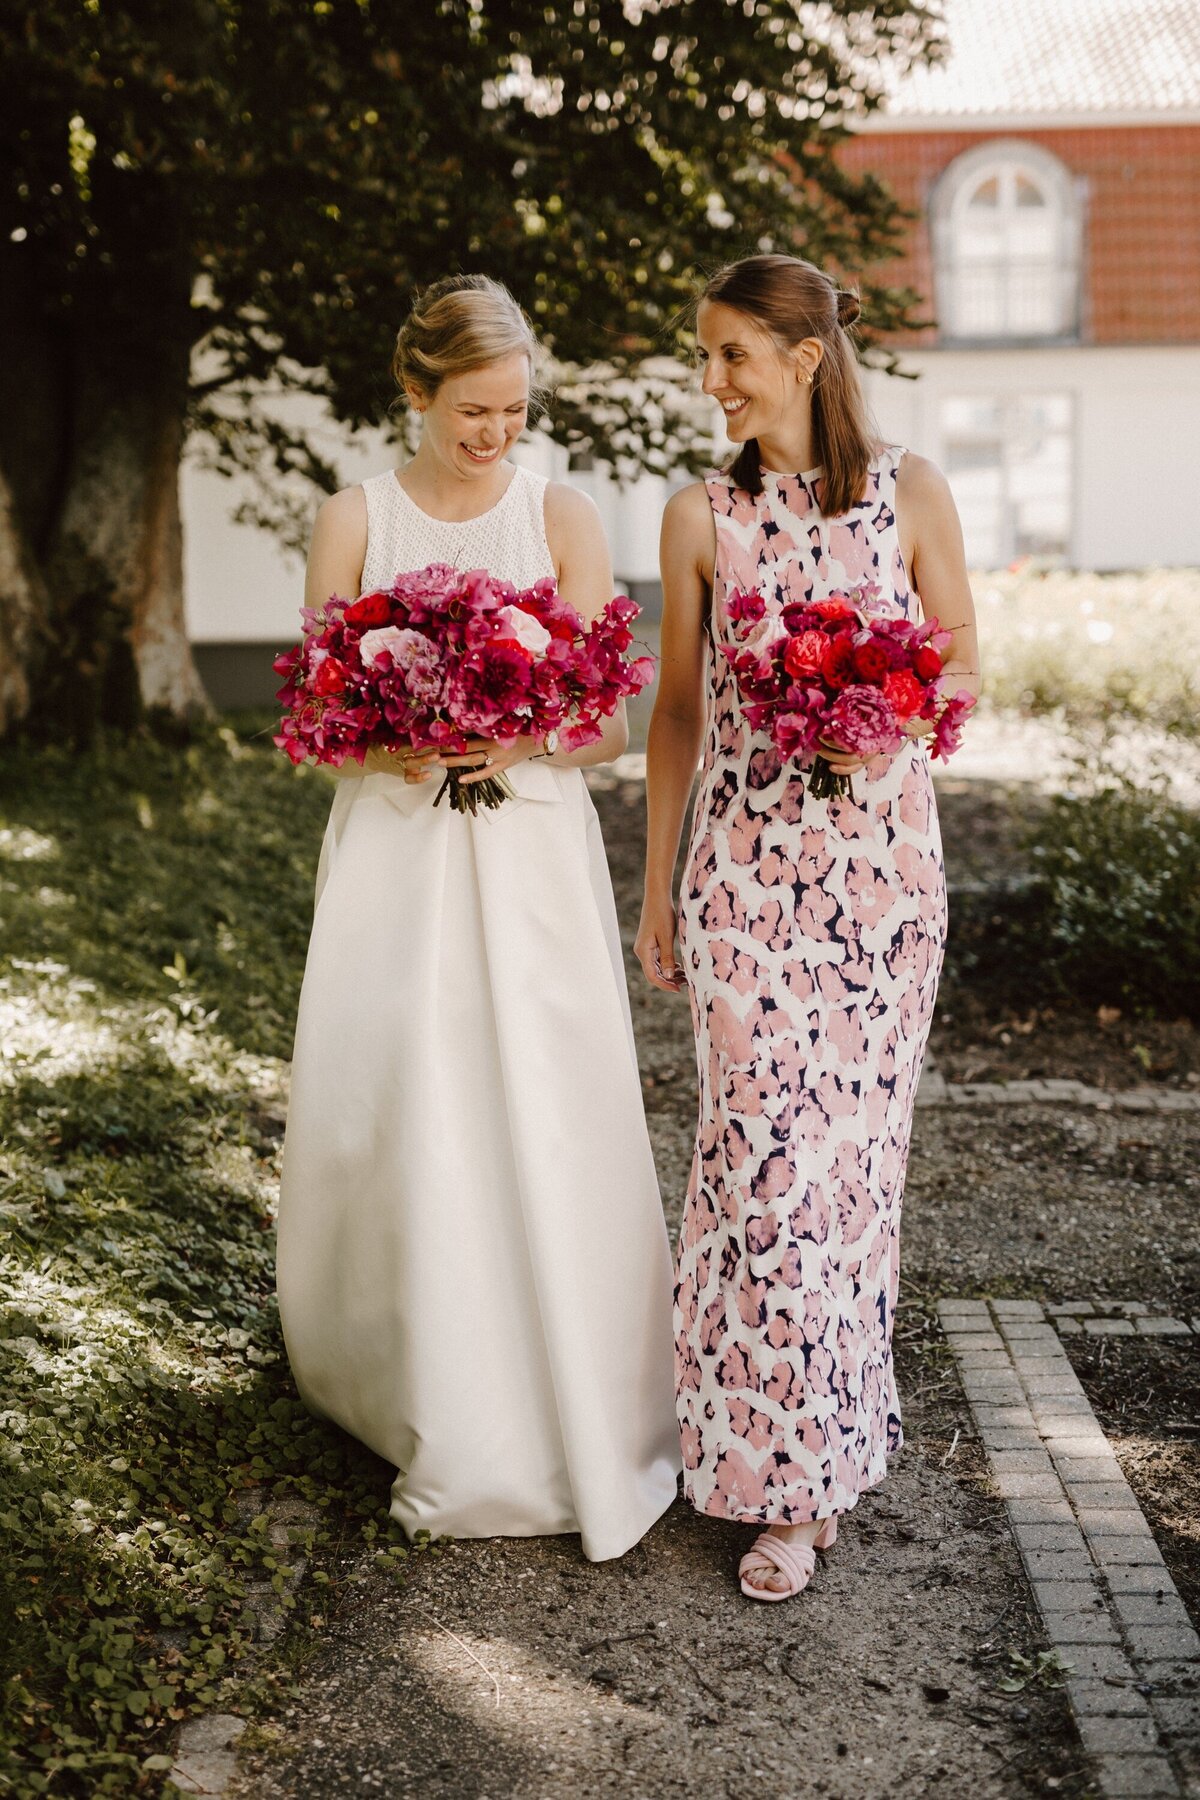 04_88 - 20210814_Wedding_Annika_Fabian_182_Elegant and timeless luxury wedding in Germany designed by floral and event designer Grace and Flowers